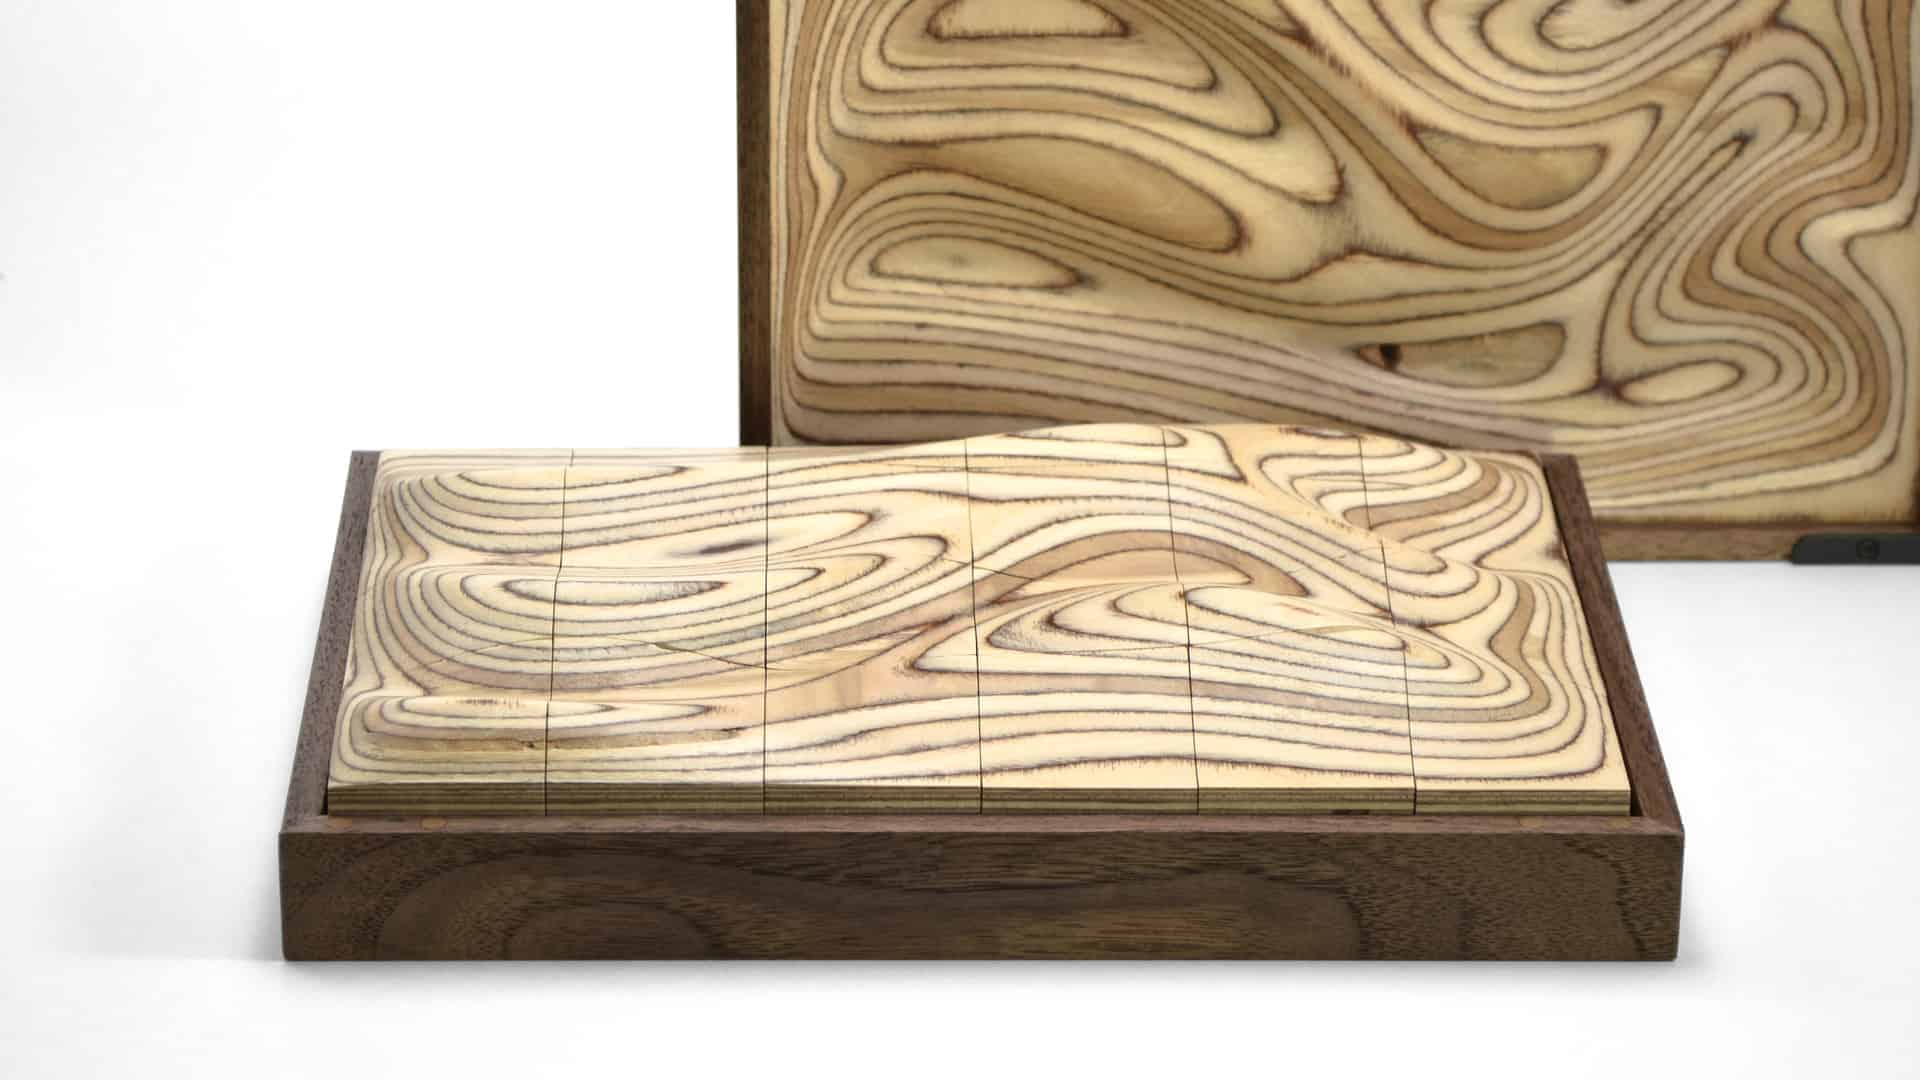 Strata | A sculptural wooden surface puzzle